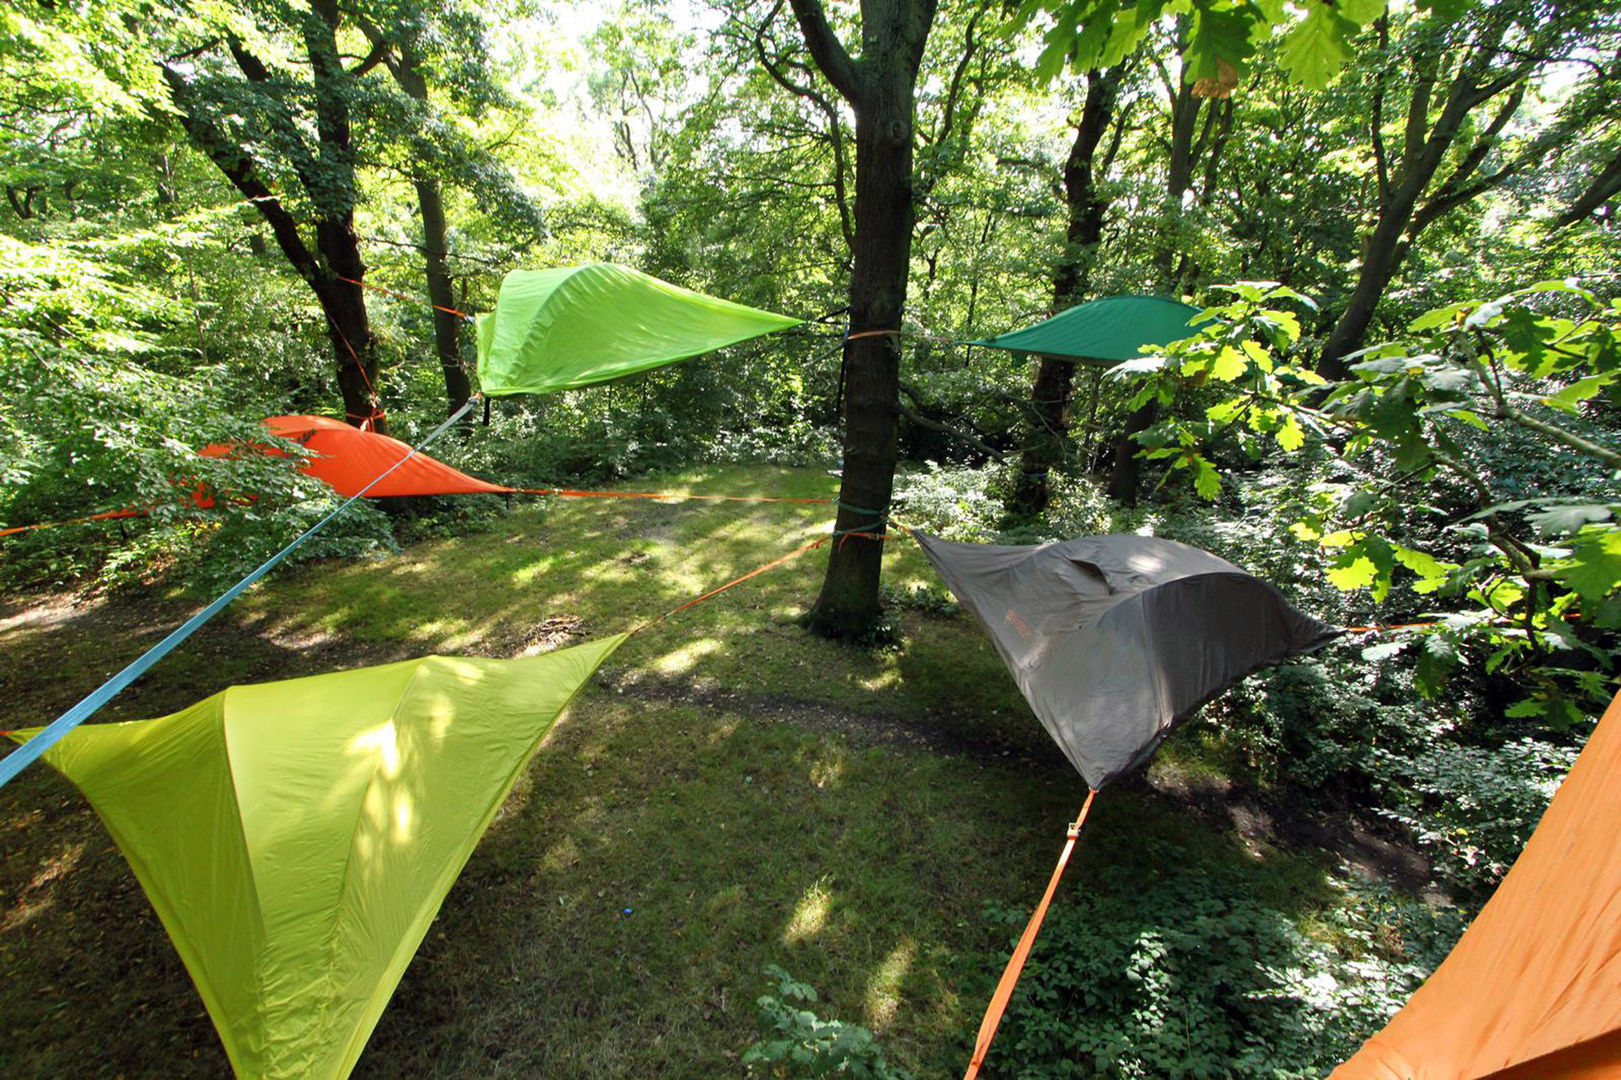 Add a New Touch to Your Camping Adventure with the Tentsile Stingray, Tentsile Tentsile Modern Bahçe Salıncak & Oyuncaklar